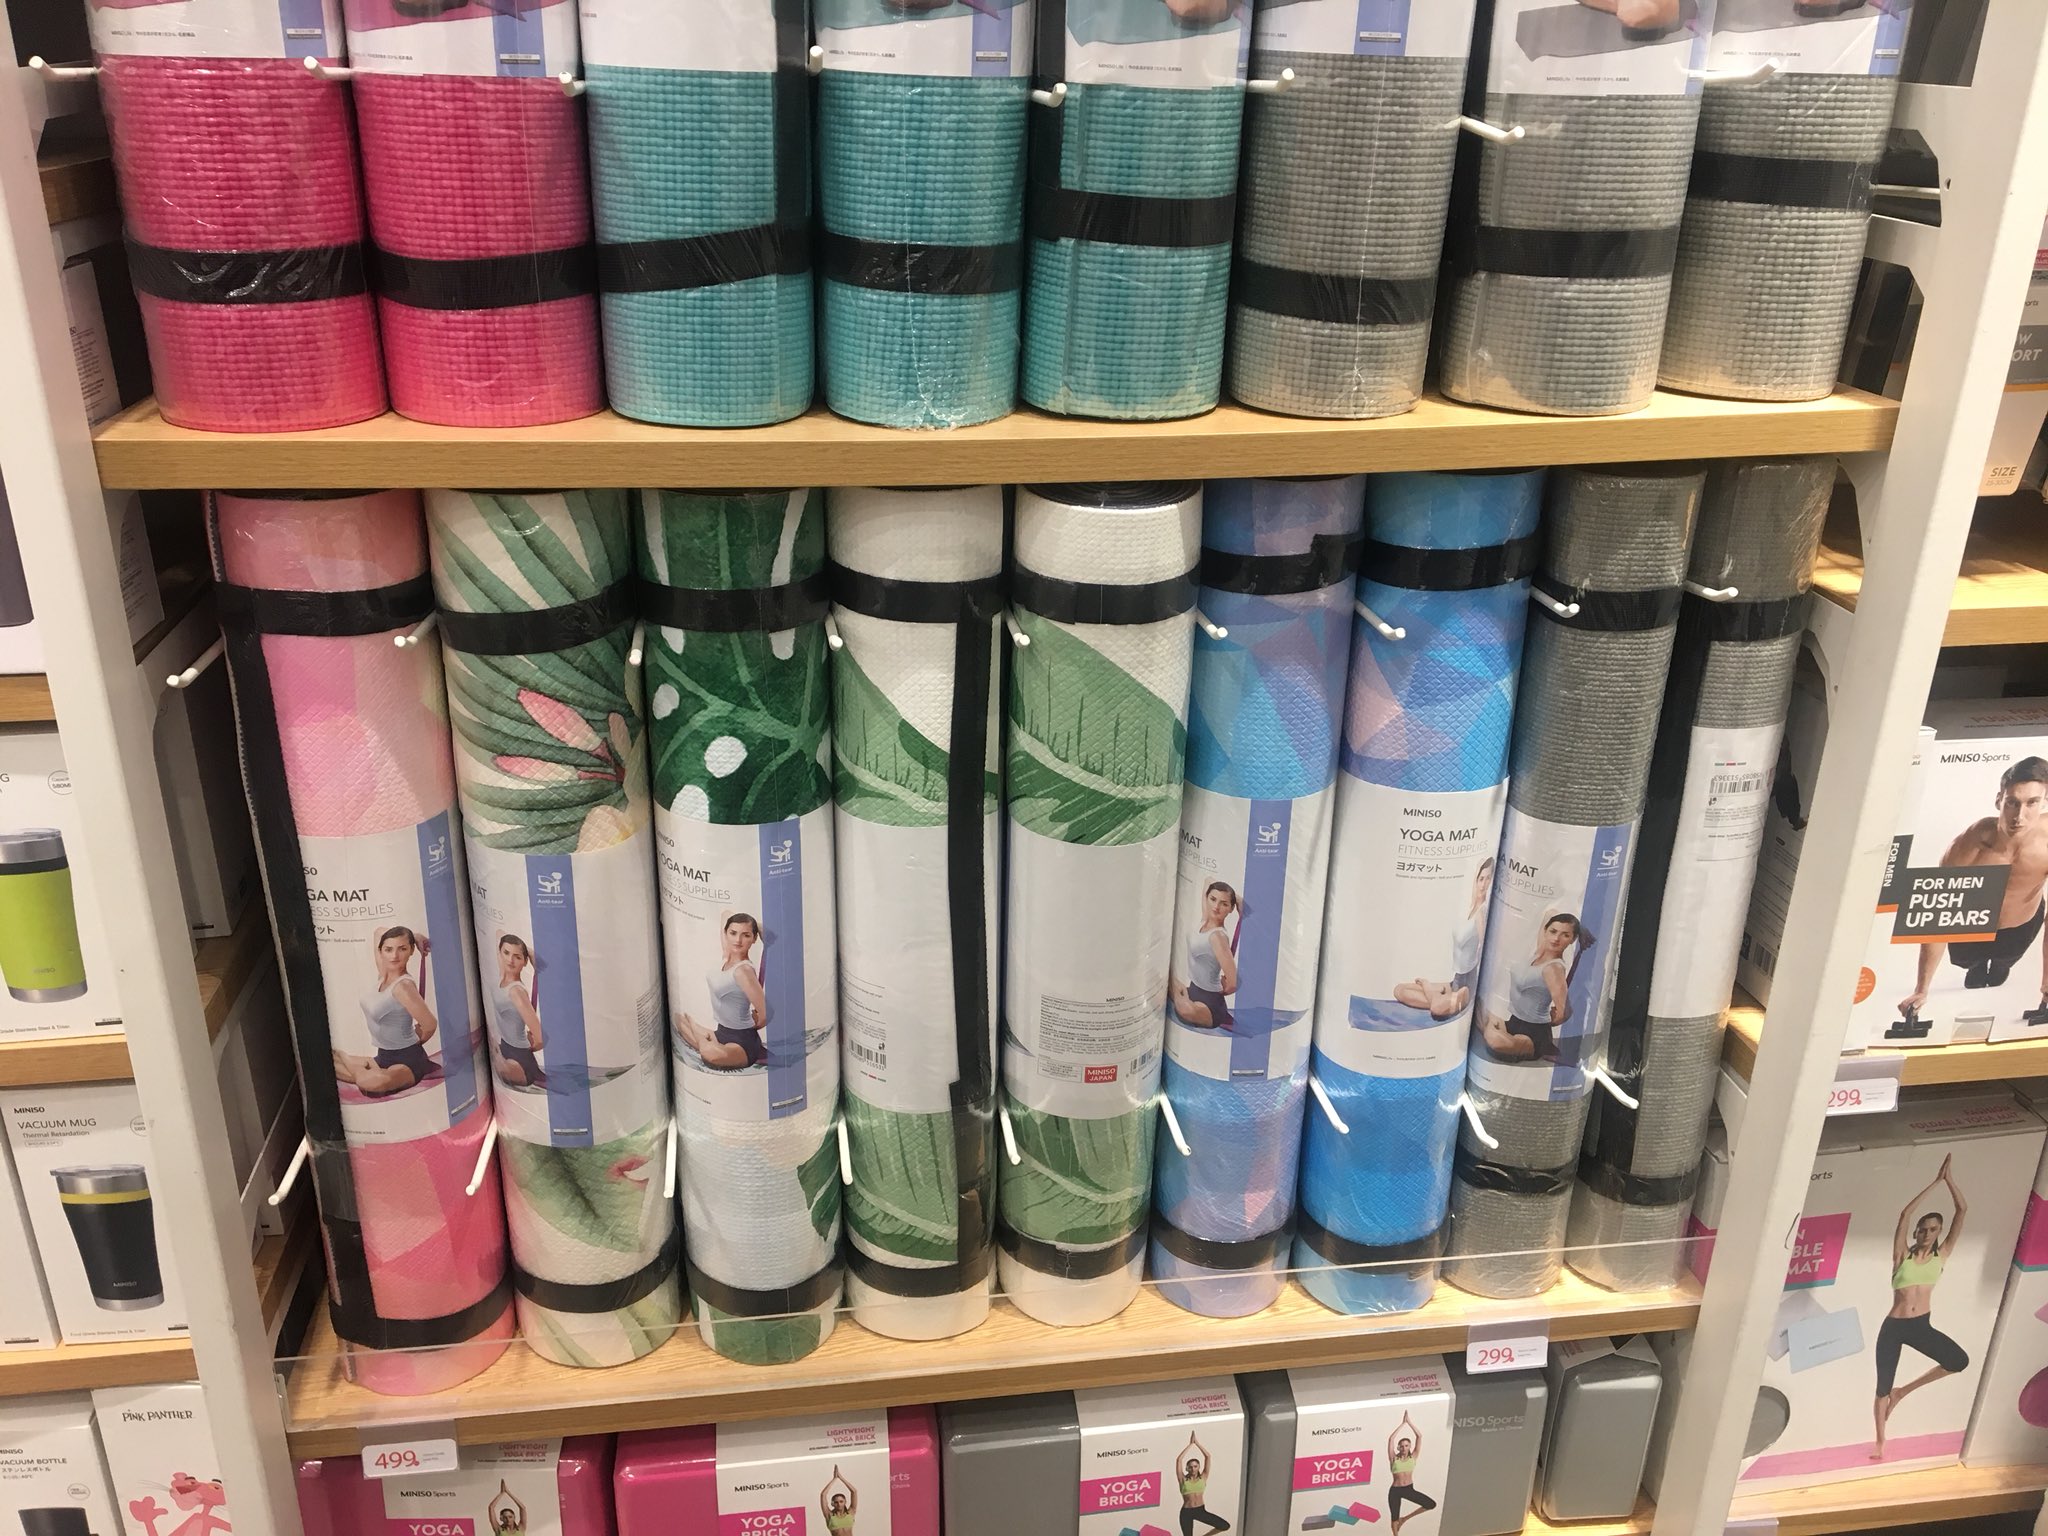 Kim Abrogena on X: Miniso is selling these cute yoga mats and i want them  all 😍😢  / X